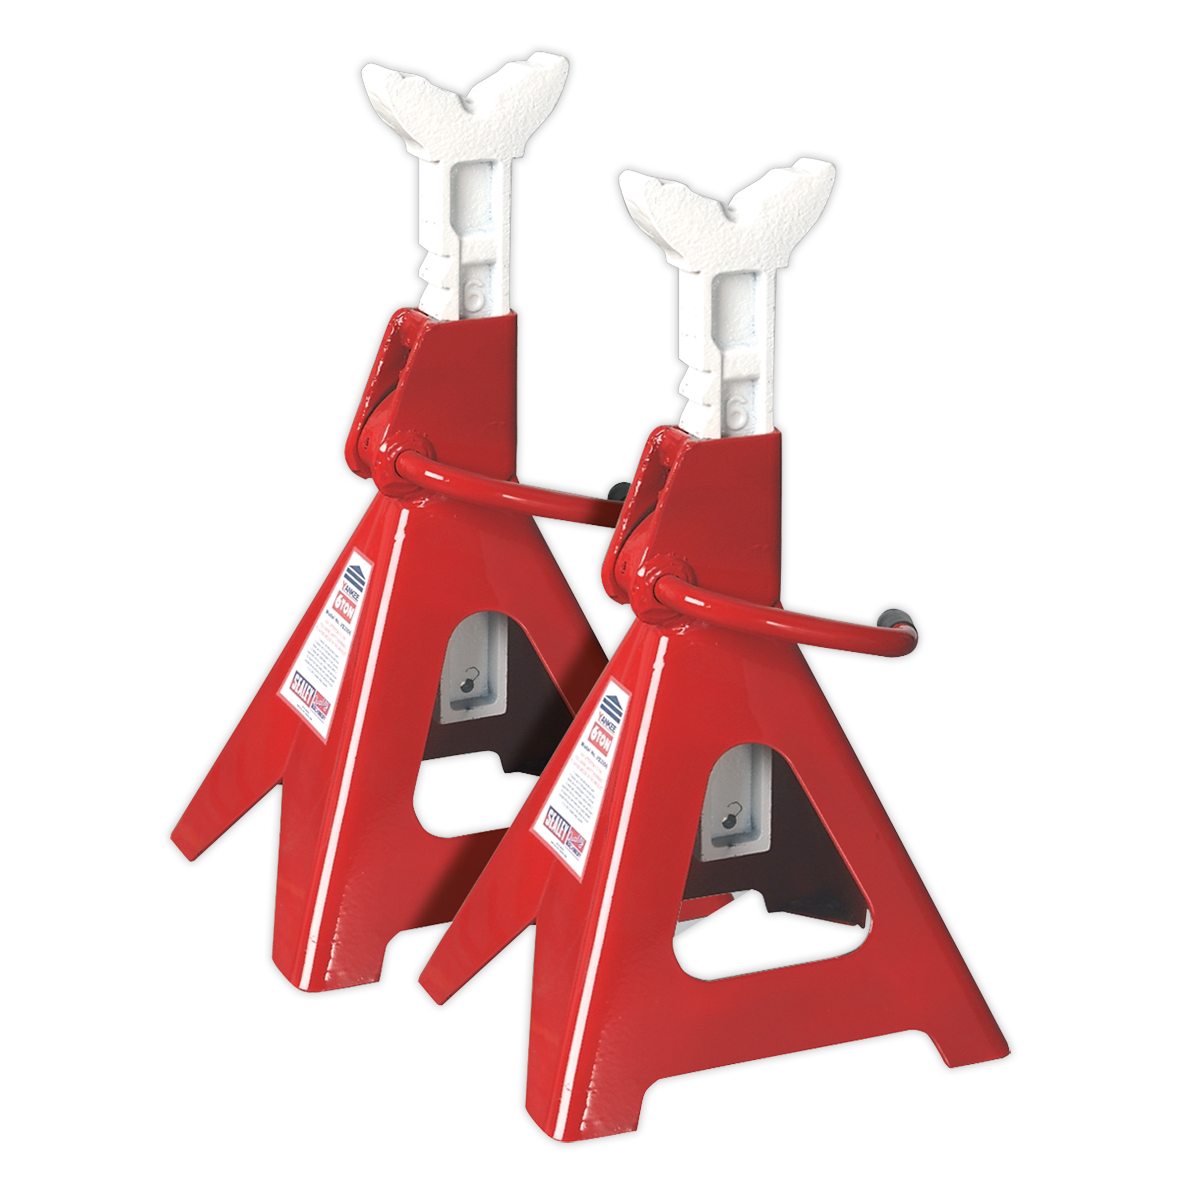 SEALEY - VS2006 Axle Stands (Pair) 6tonne Capacity per Stand Ratchet Type